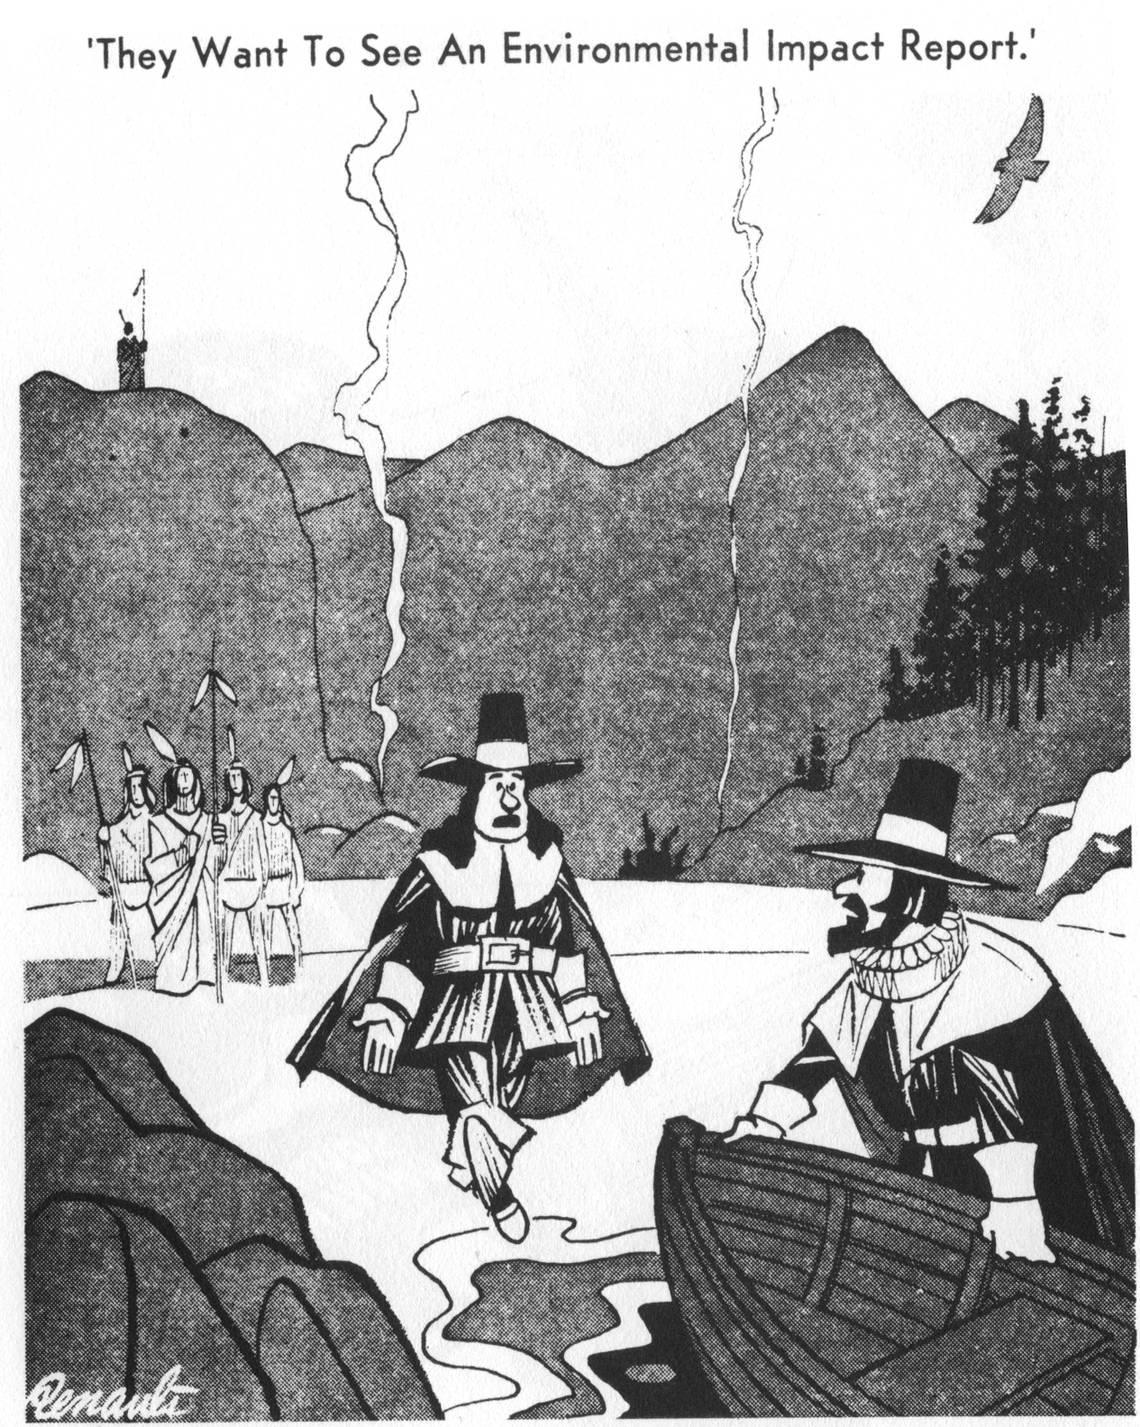 “They want to see an environmental impact report,” reads a caption to a 1972 Dennis Renault editorial cartoon that imagines the California Environment Quality Act in effect for the Pligrams’ arrival at Plymouth Rock. The landmark legislation was passed in 1970 and signed into law by then-Gov. Ronald Reagan.